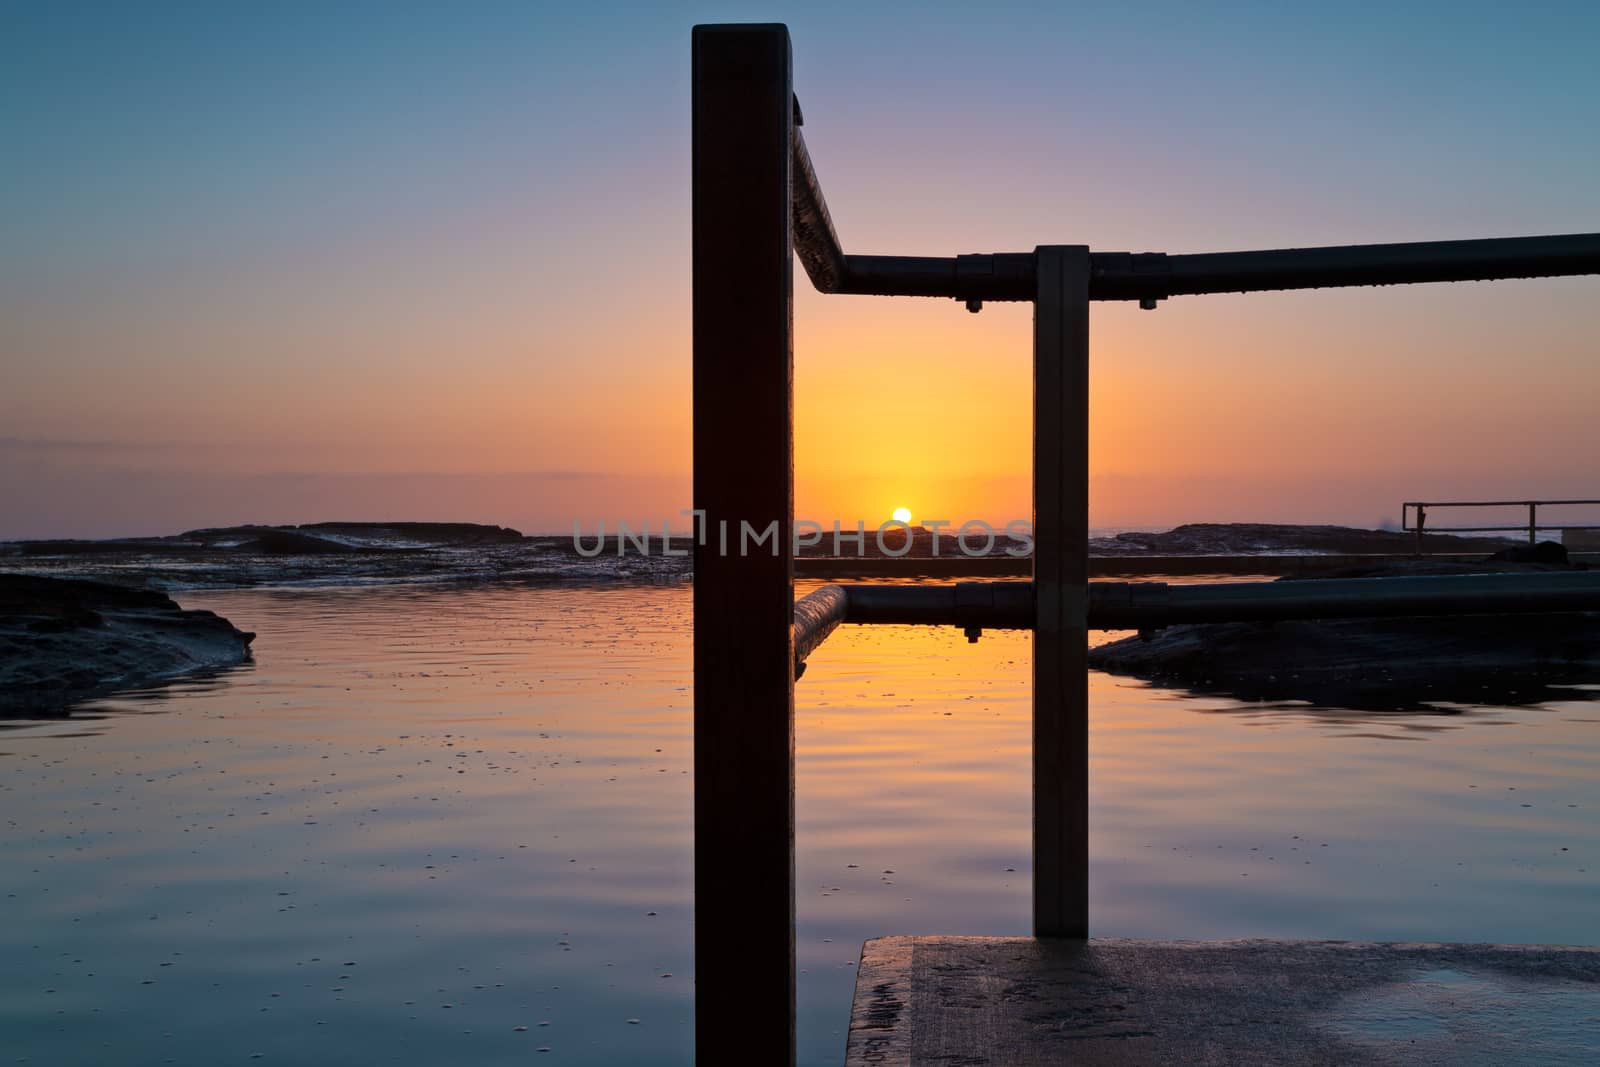 Glorious tranquil sunrise on the ocean horizon and ocean pool ripples and reflections. Location - North Curl Curl, nortthern beaches Sydney Australia